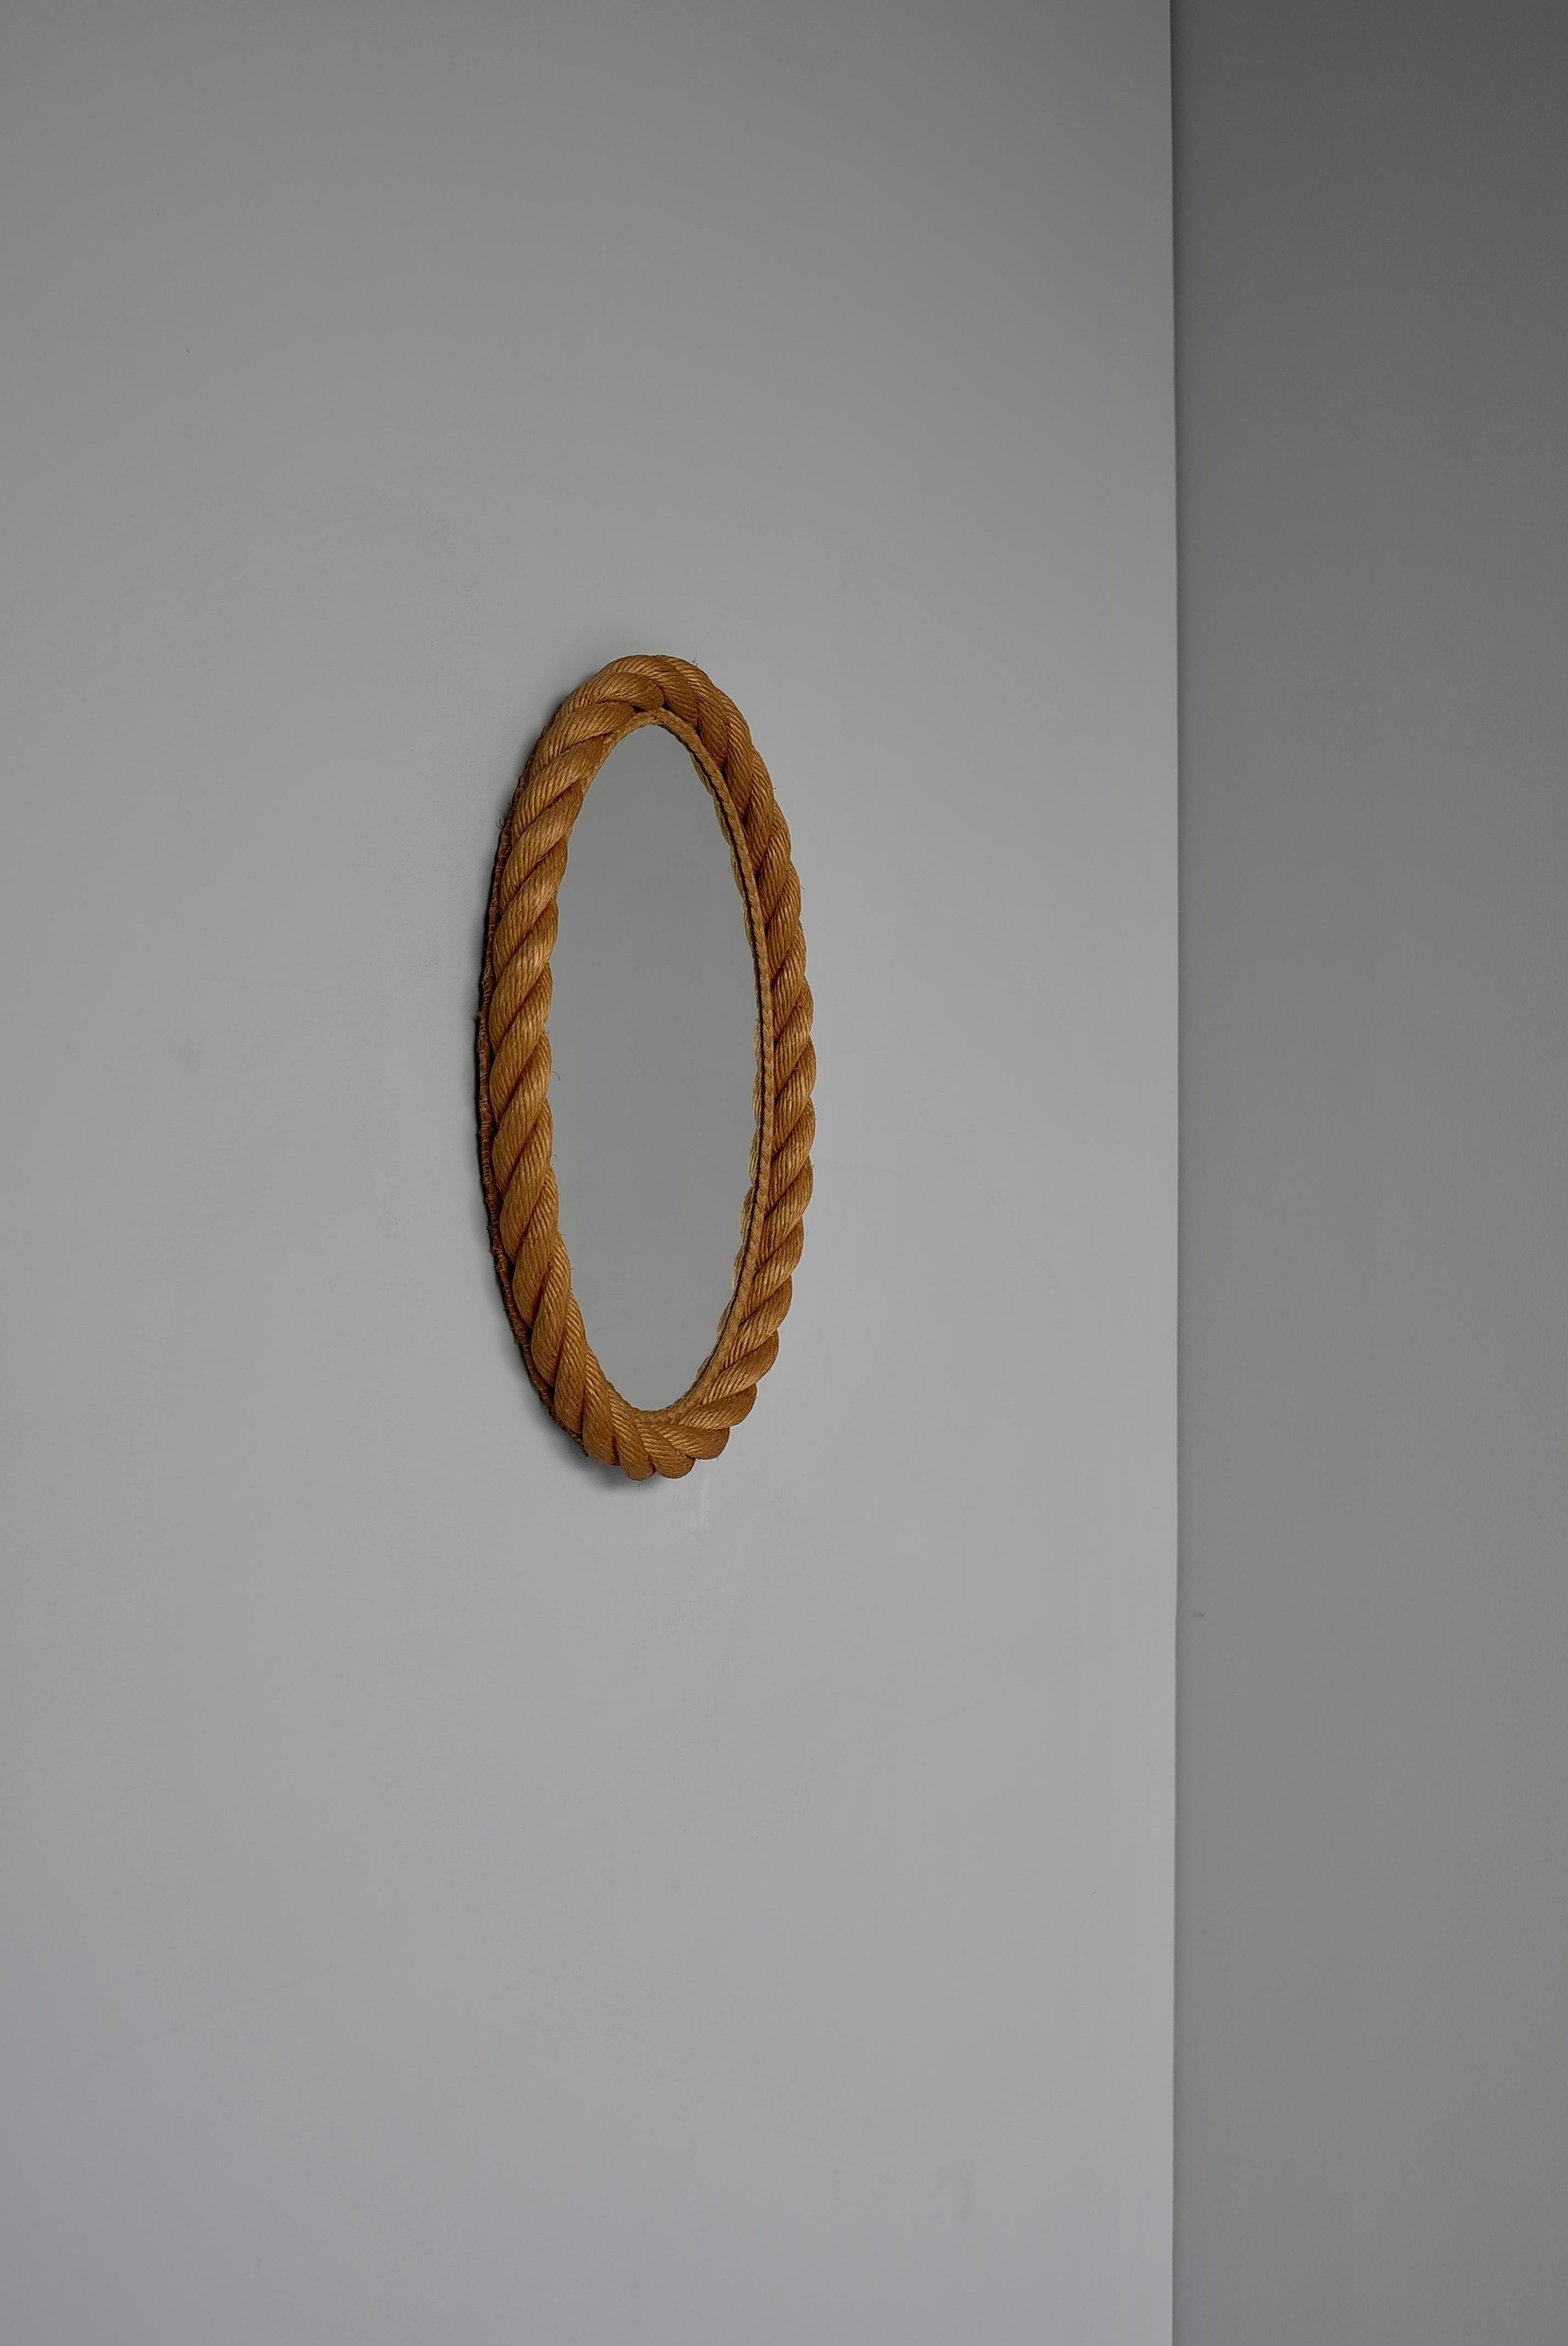 20th Century Oval Rope Mirror by Adrien Audoux and Frida Minet, France, 1950s